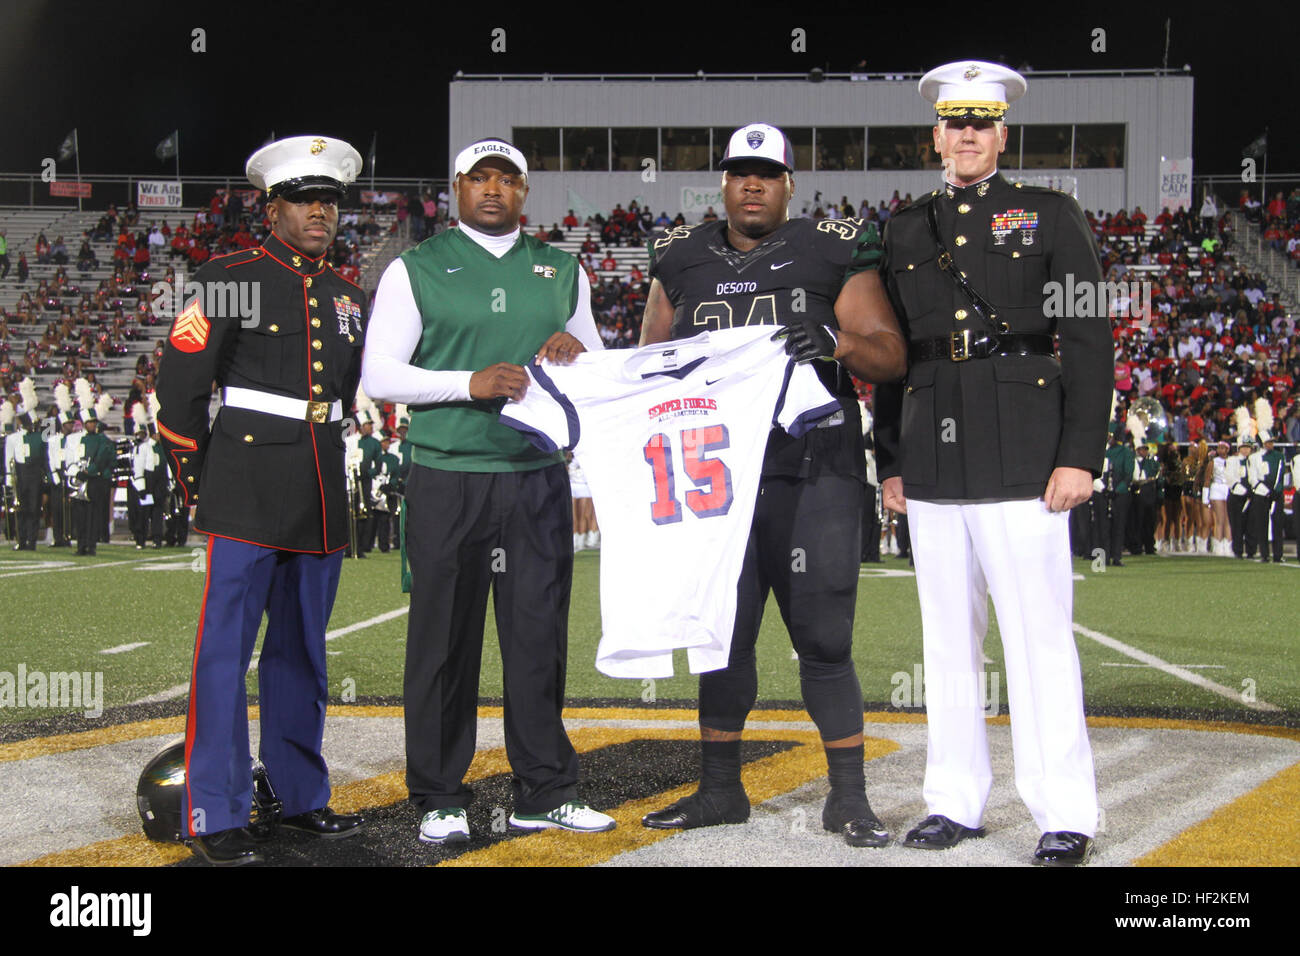 Bryce English, a defensive tackle from Desoto High School selected to play in the 2015 Semper Fidelis All-American Bowl, alongside Claude Mathis, Desoto High School Head Football Coach, receives his jersey from Maj. Charles Nicol (right), the commanding officer of Recruiting Station Dallas, and Sgt. Timothy Clark (left), a recruiter with Recruiting Substation Dallas South, during the halftime ceremony of the Desoto vs. Cedar Hill High School football game Oct. 23. The United States Marine Corps is recognizing exemplary student athletes across the country through the Semper Fi Bowl. Now in its  Stock Photo